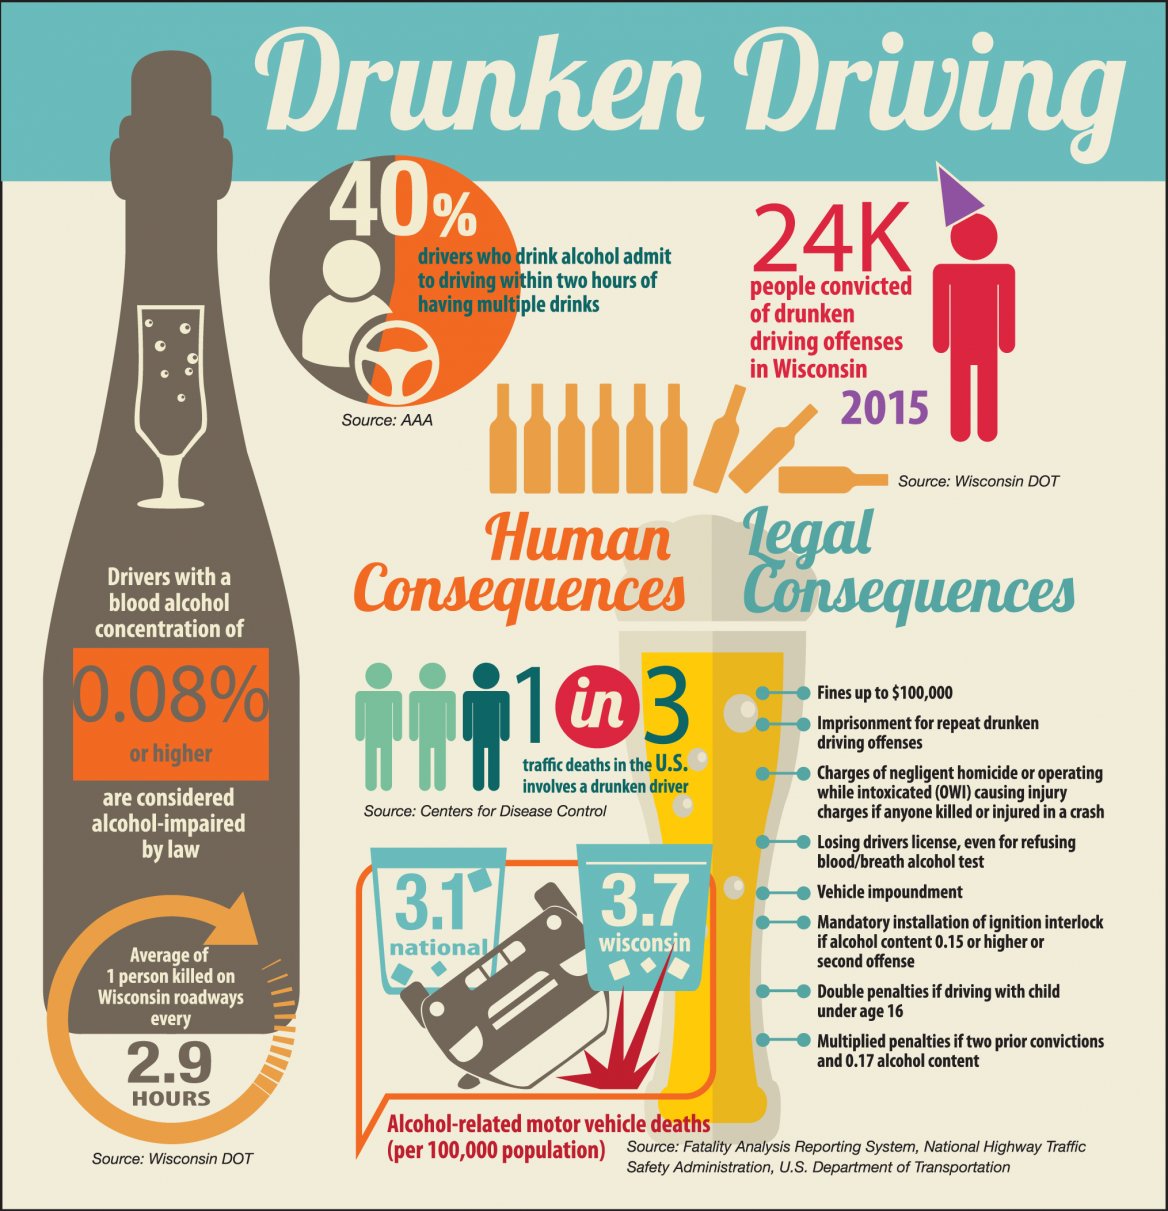 Strategies to Prevent Drunk Driving Community and Law Enforcement